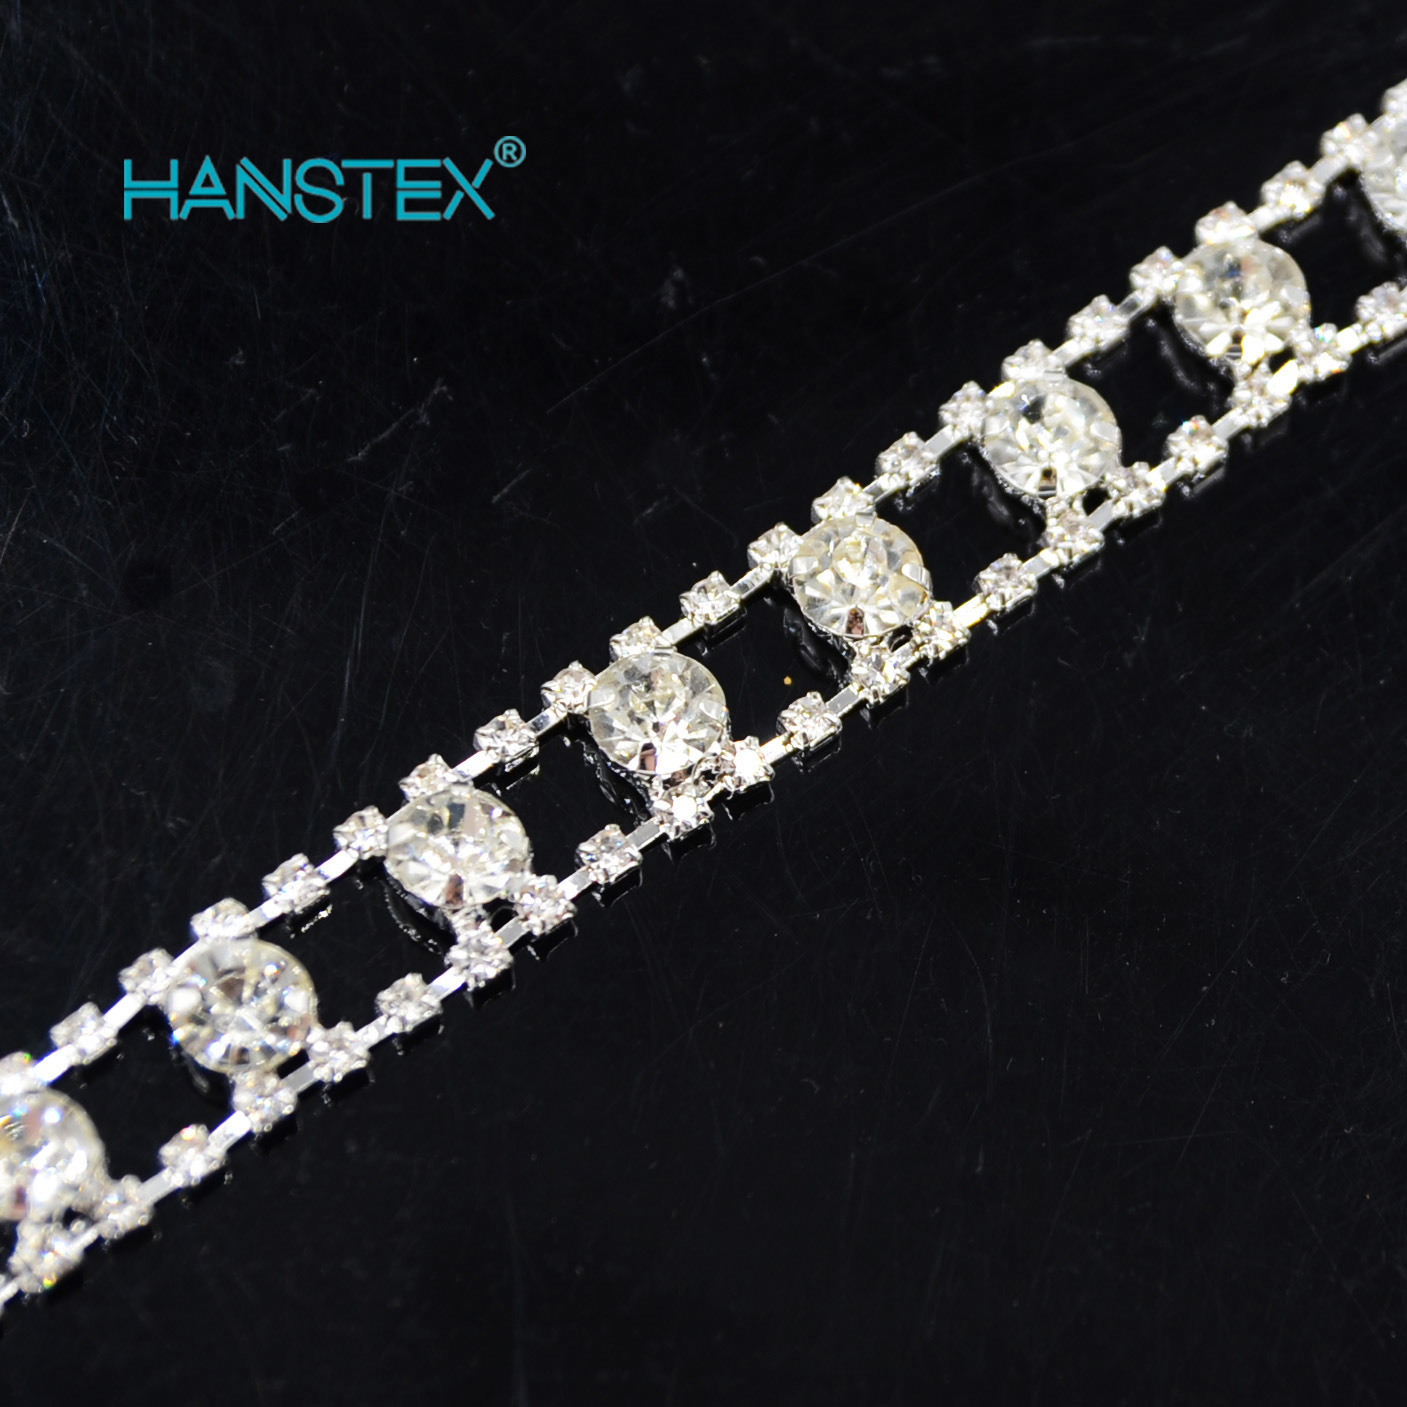 New Arrival Fashion Metal Crystal Diamond Rhinestone Cup Chain for Clothings